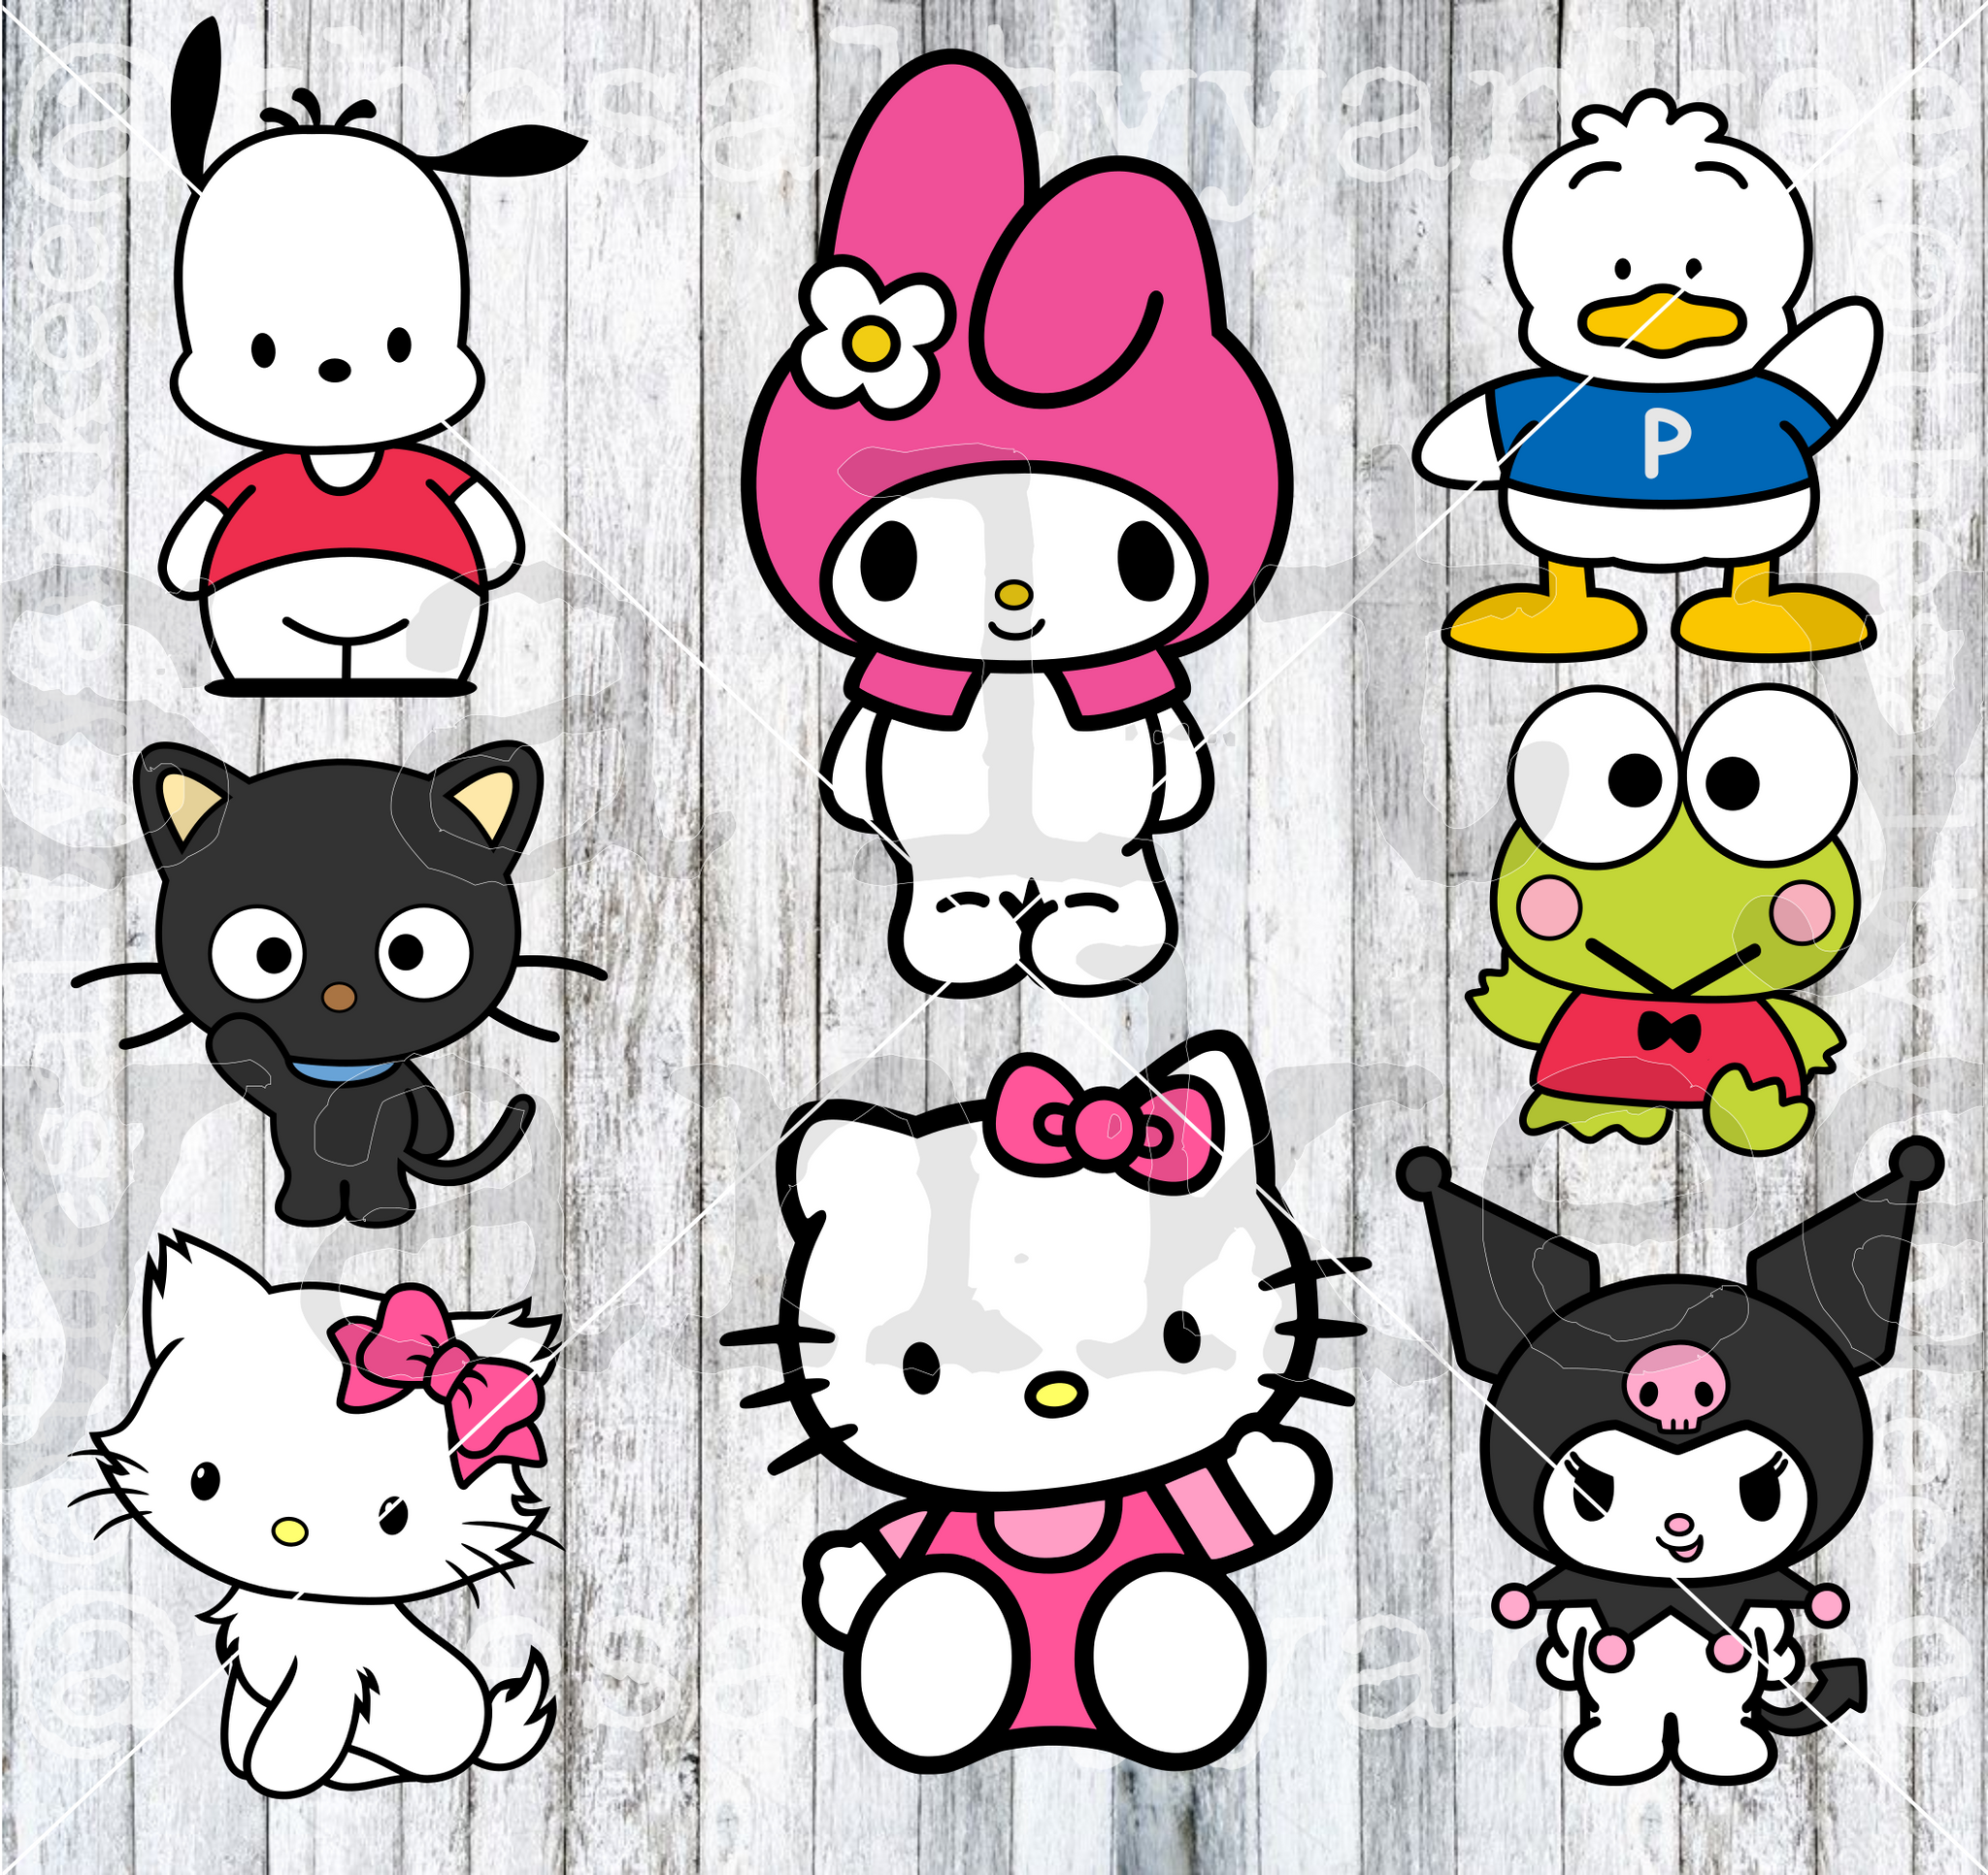 Hello Kitty® and Friends